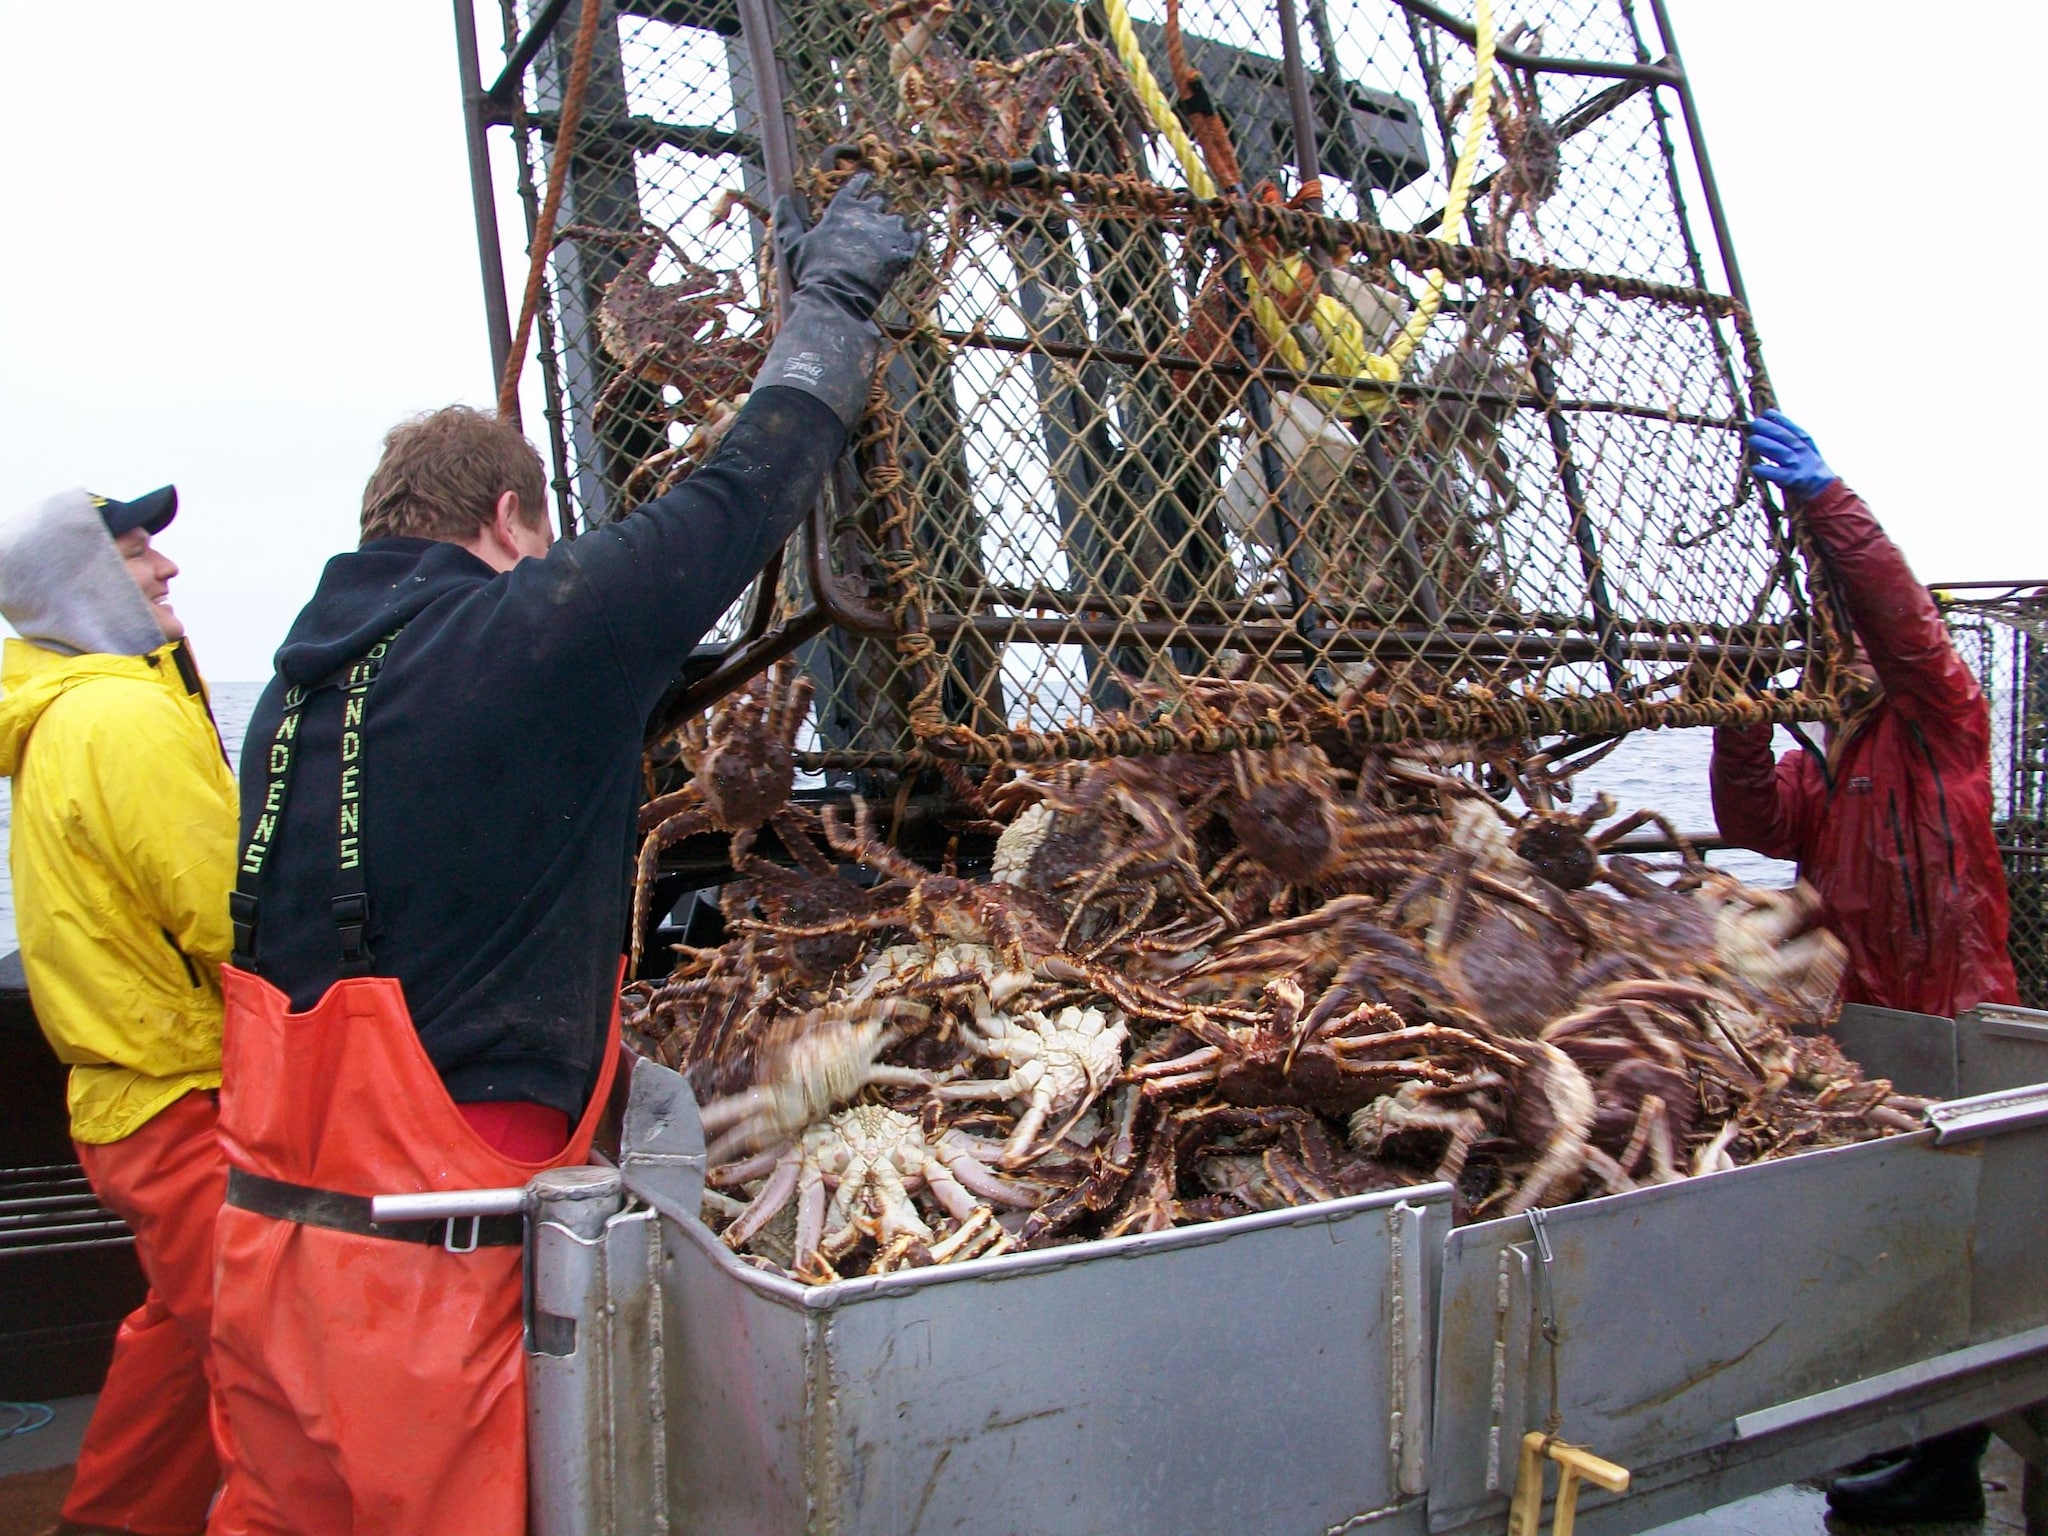 Crewmembers empty a crab pot of Red King crab onto sorting table of a Bering Sea crab vessel